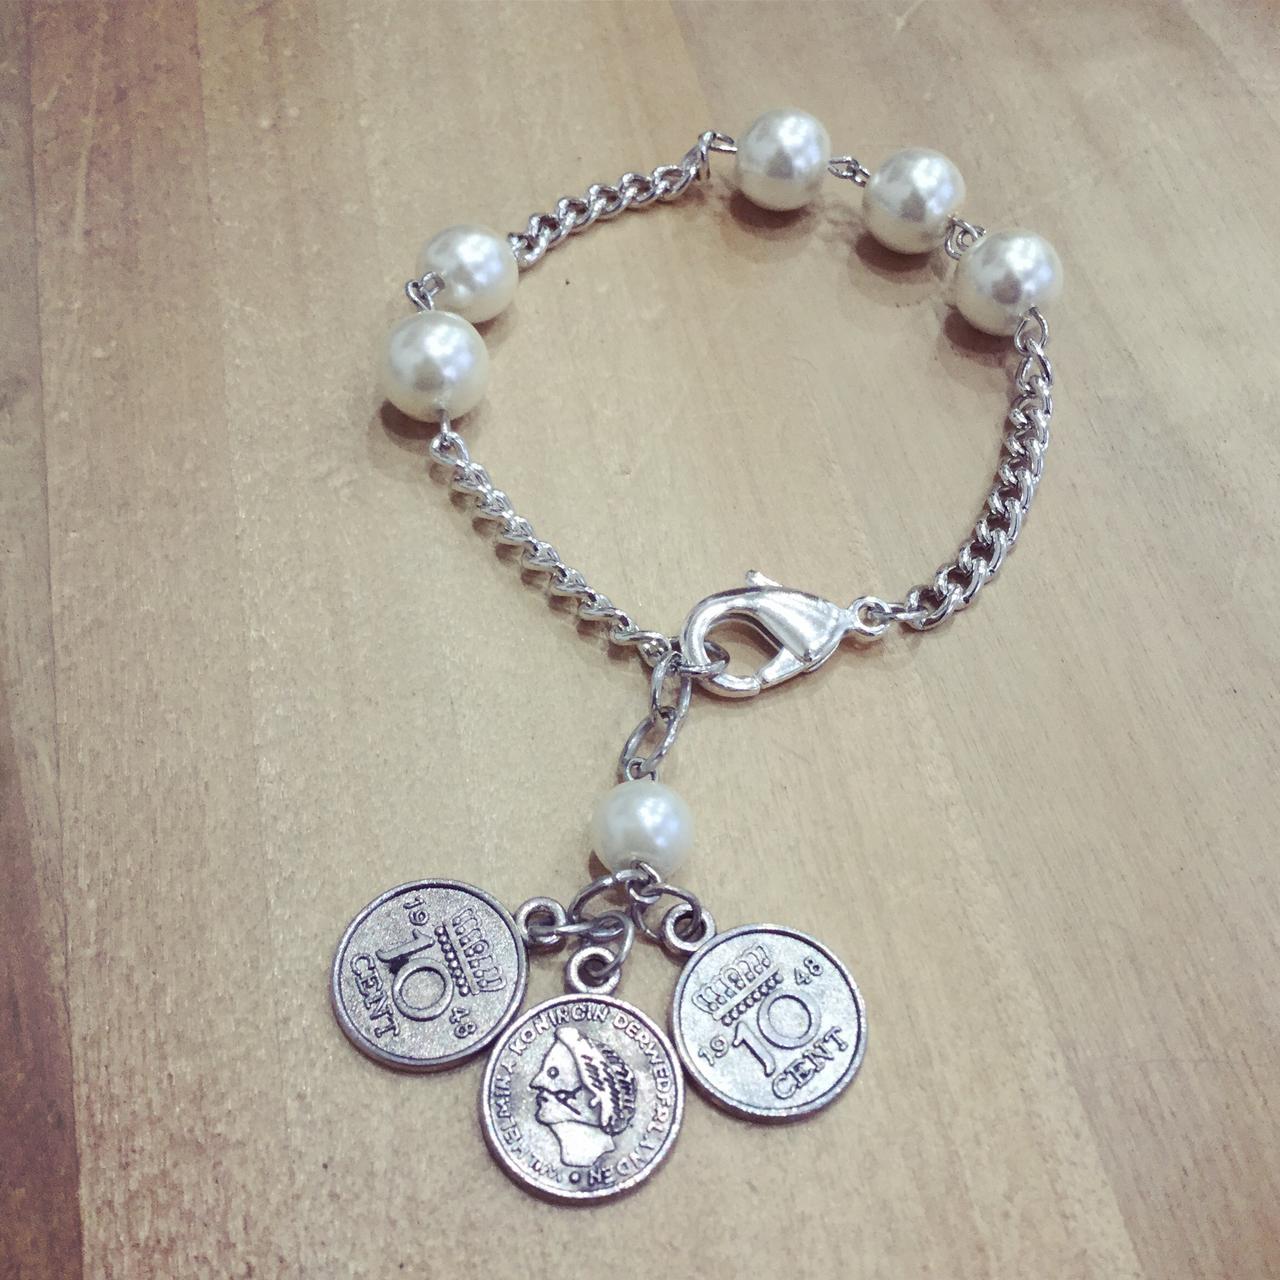 Women's Silver and White Jewellery